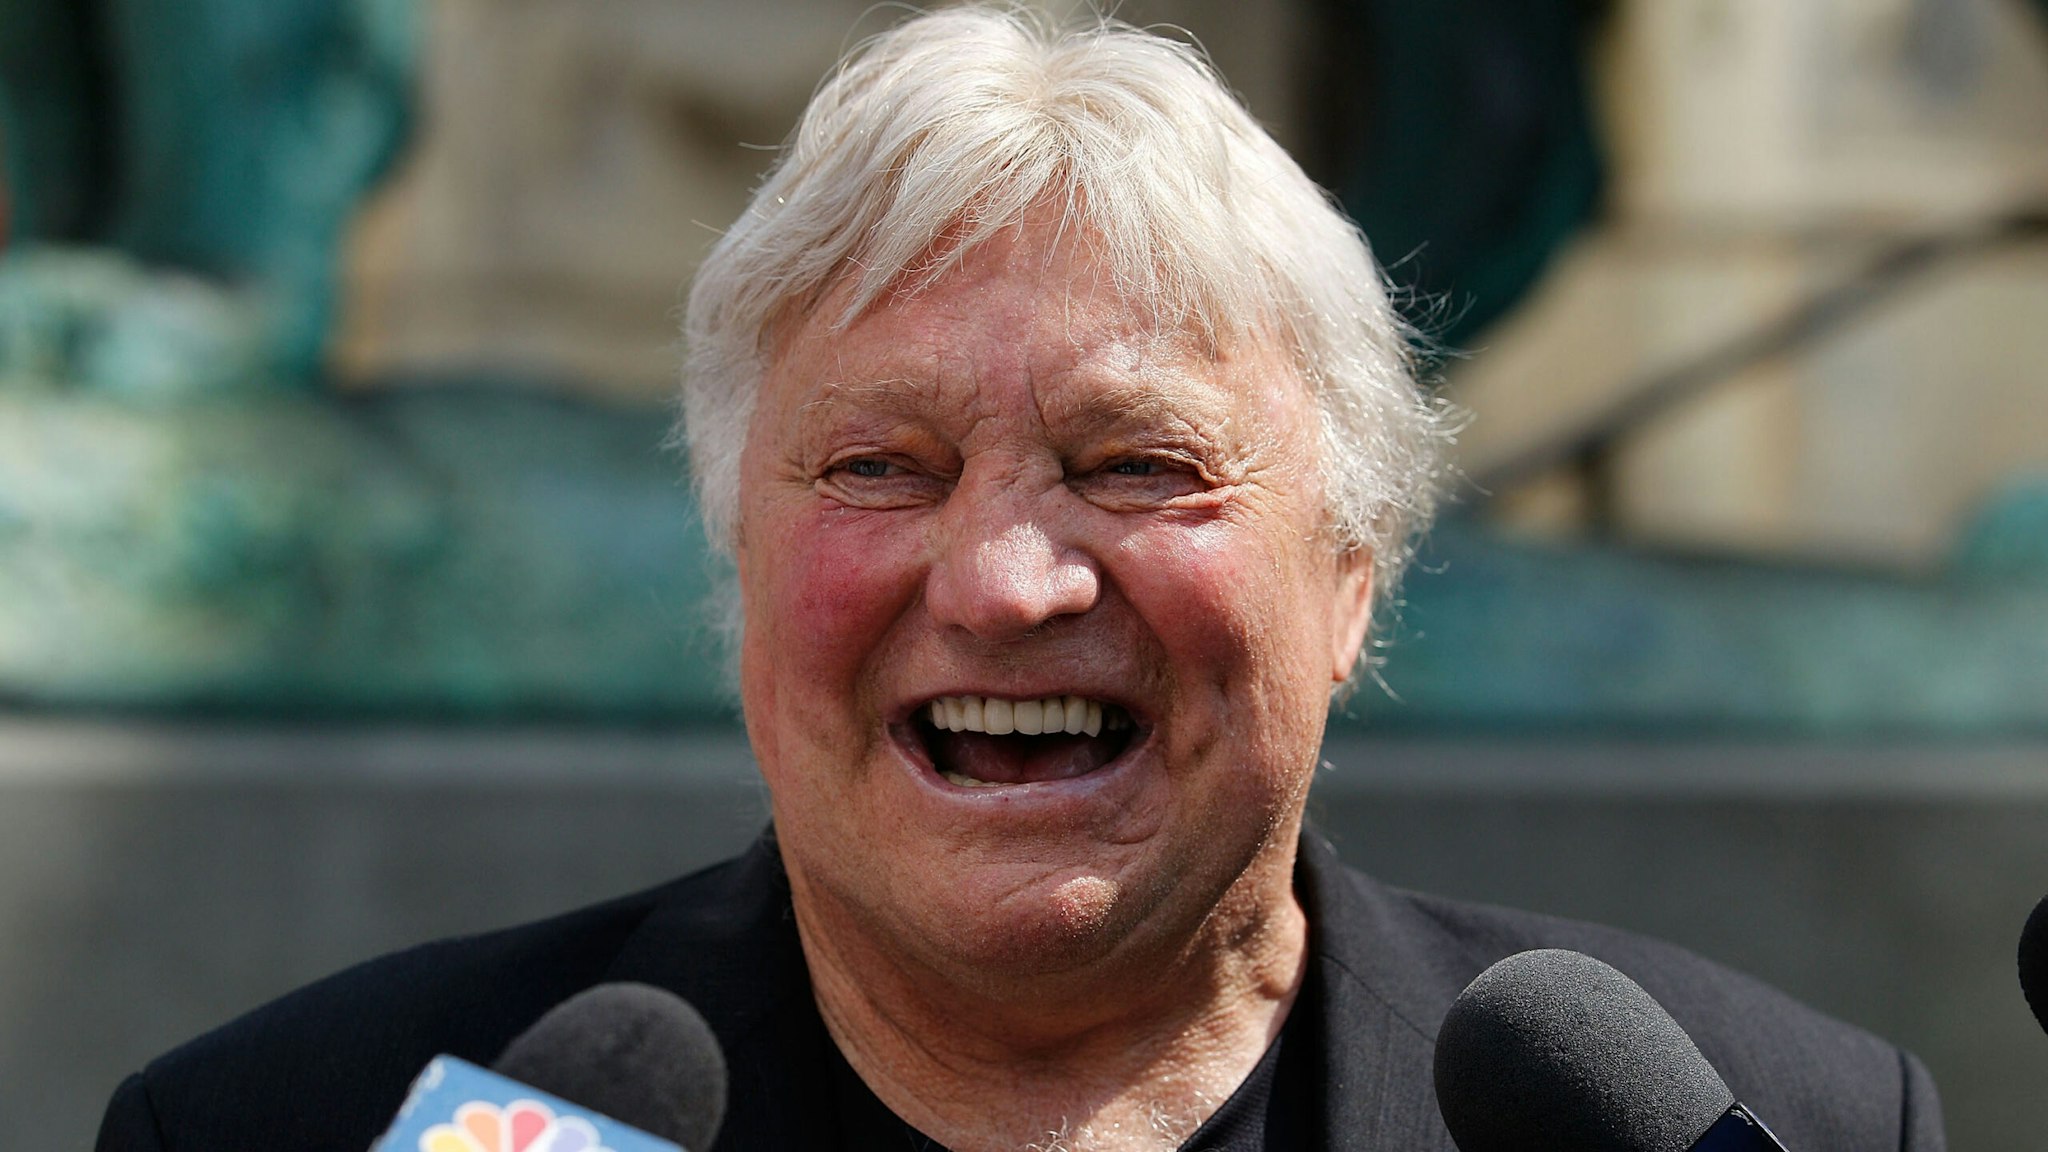 CHICAGO - MAY 26: Former Chicago Blackhawks star and Hall of Famer Bobby Hull meets with reporters in front of a lion sculpture sporting a Blackhawks helmet in celebration of the Blackhawks appearence in the Stanley Cup Finals against the Philadelphia Fylers at the Art Institue of Chicago on May 26, 2010 in Chicago, Illinois. The lion sculptures, by artist Edward L. Kemeys, were installed at the Michigan Avenue entrance to the museum in 1894.